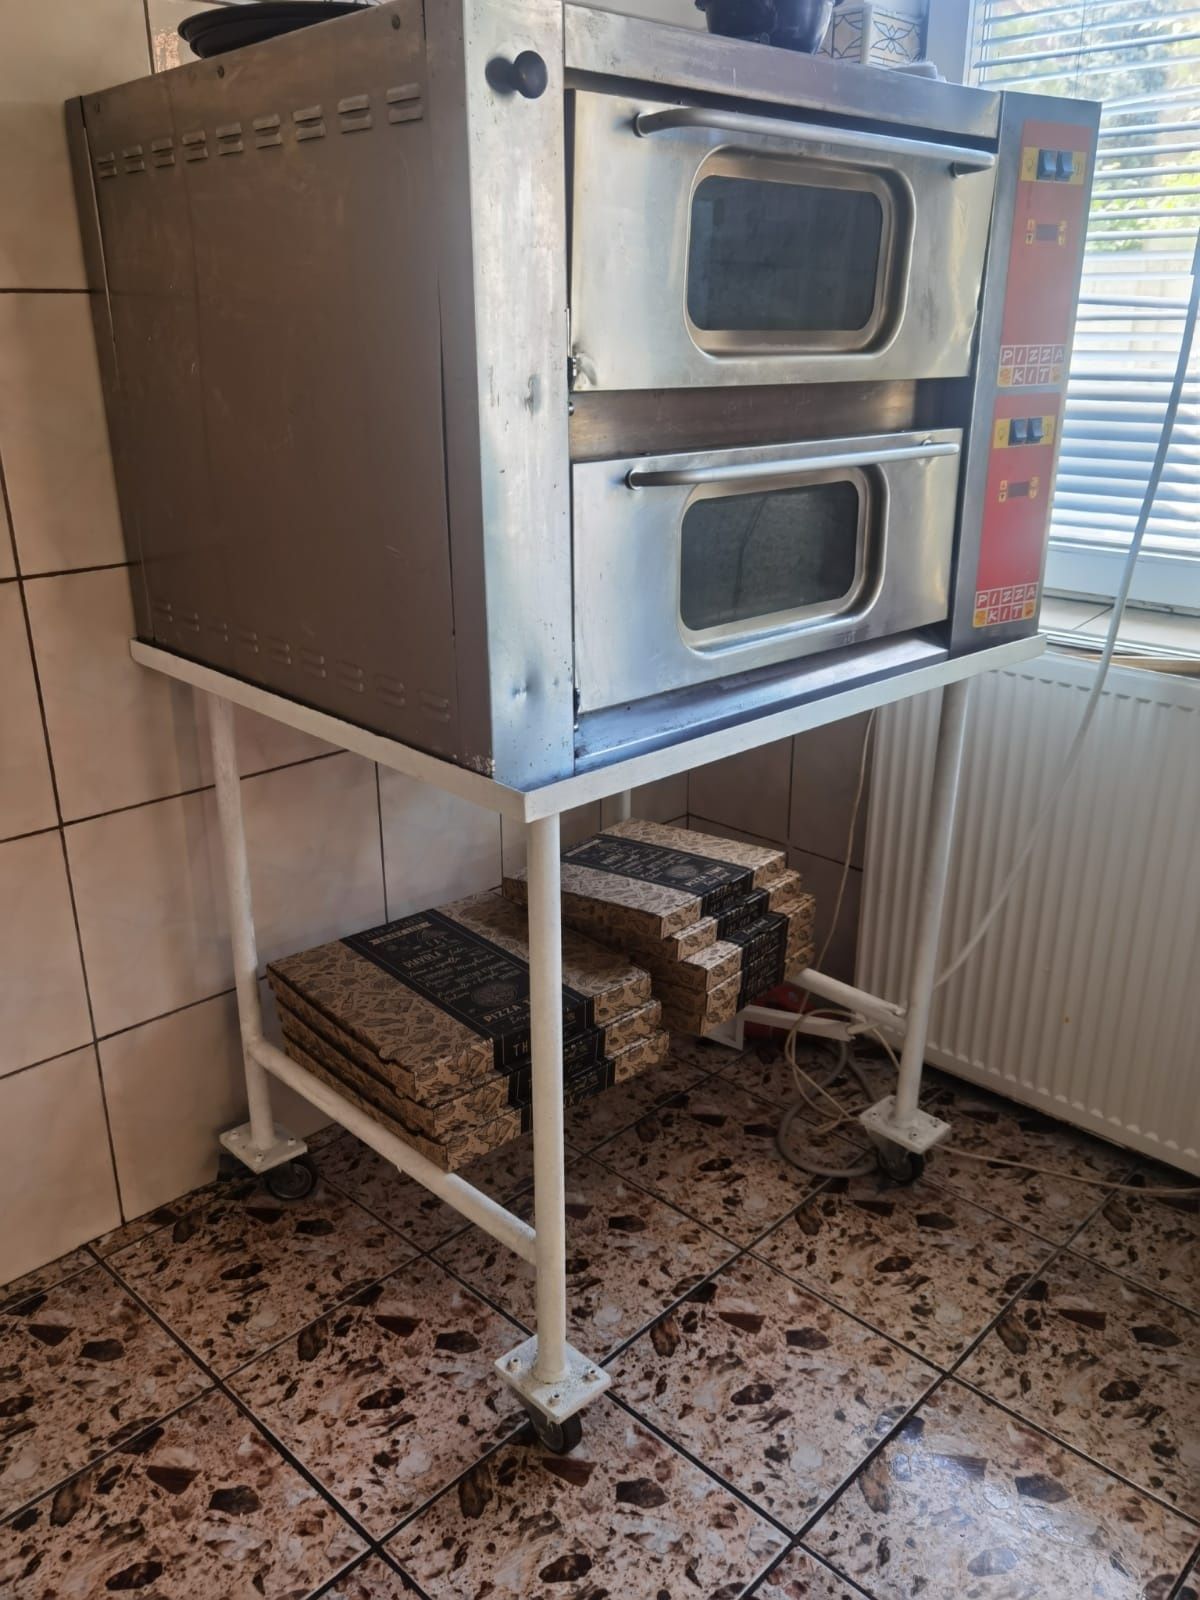 Cuptor pizza - patiserie digital electric automat